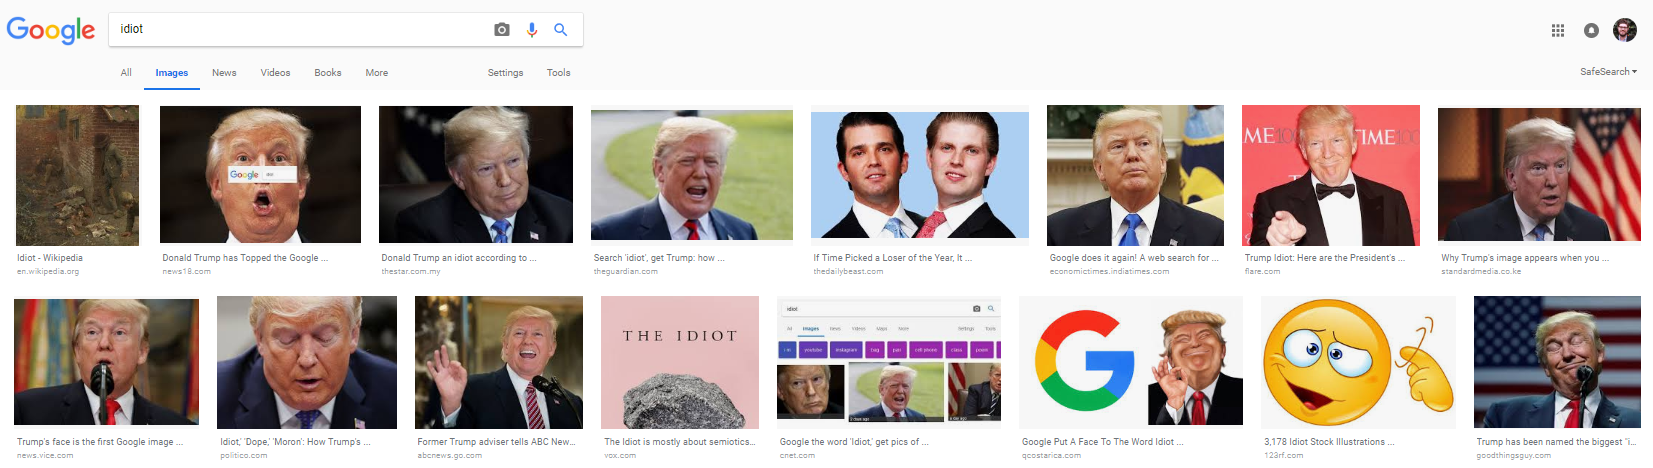 How Trump's image appears when you search for the word idiot on Google.